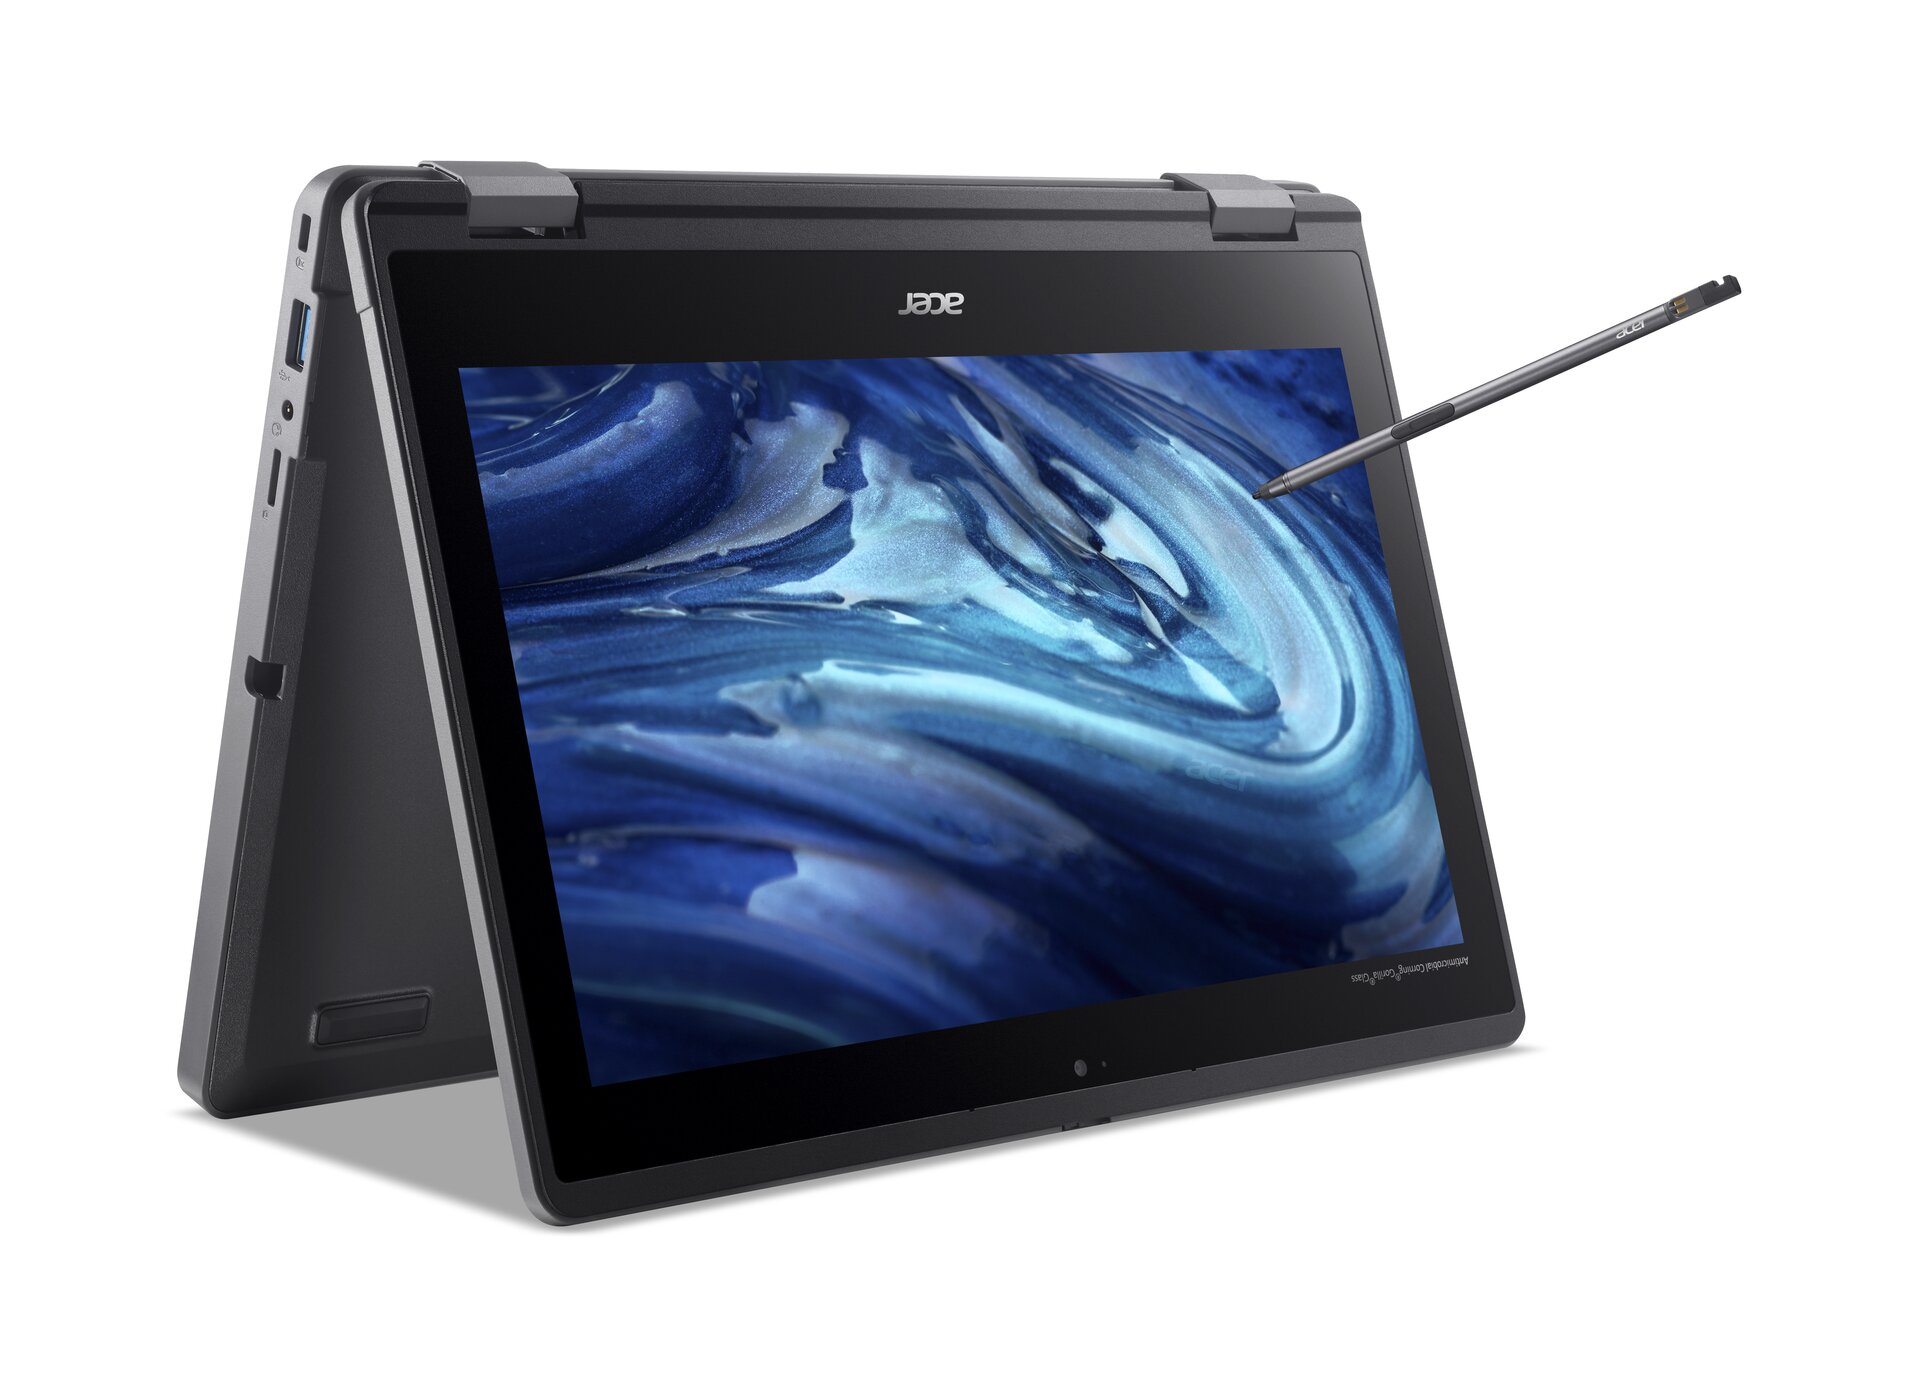 Acer TravelMate B3 Spin